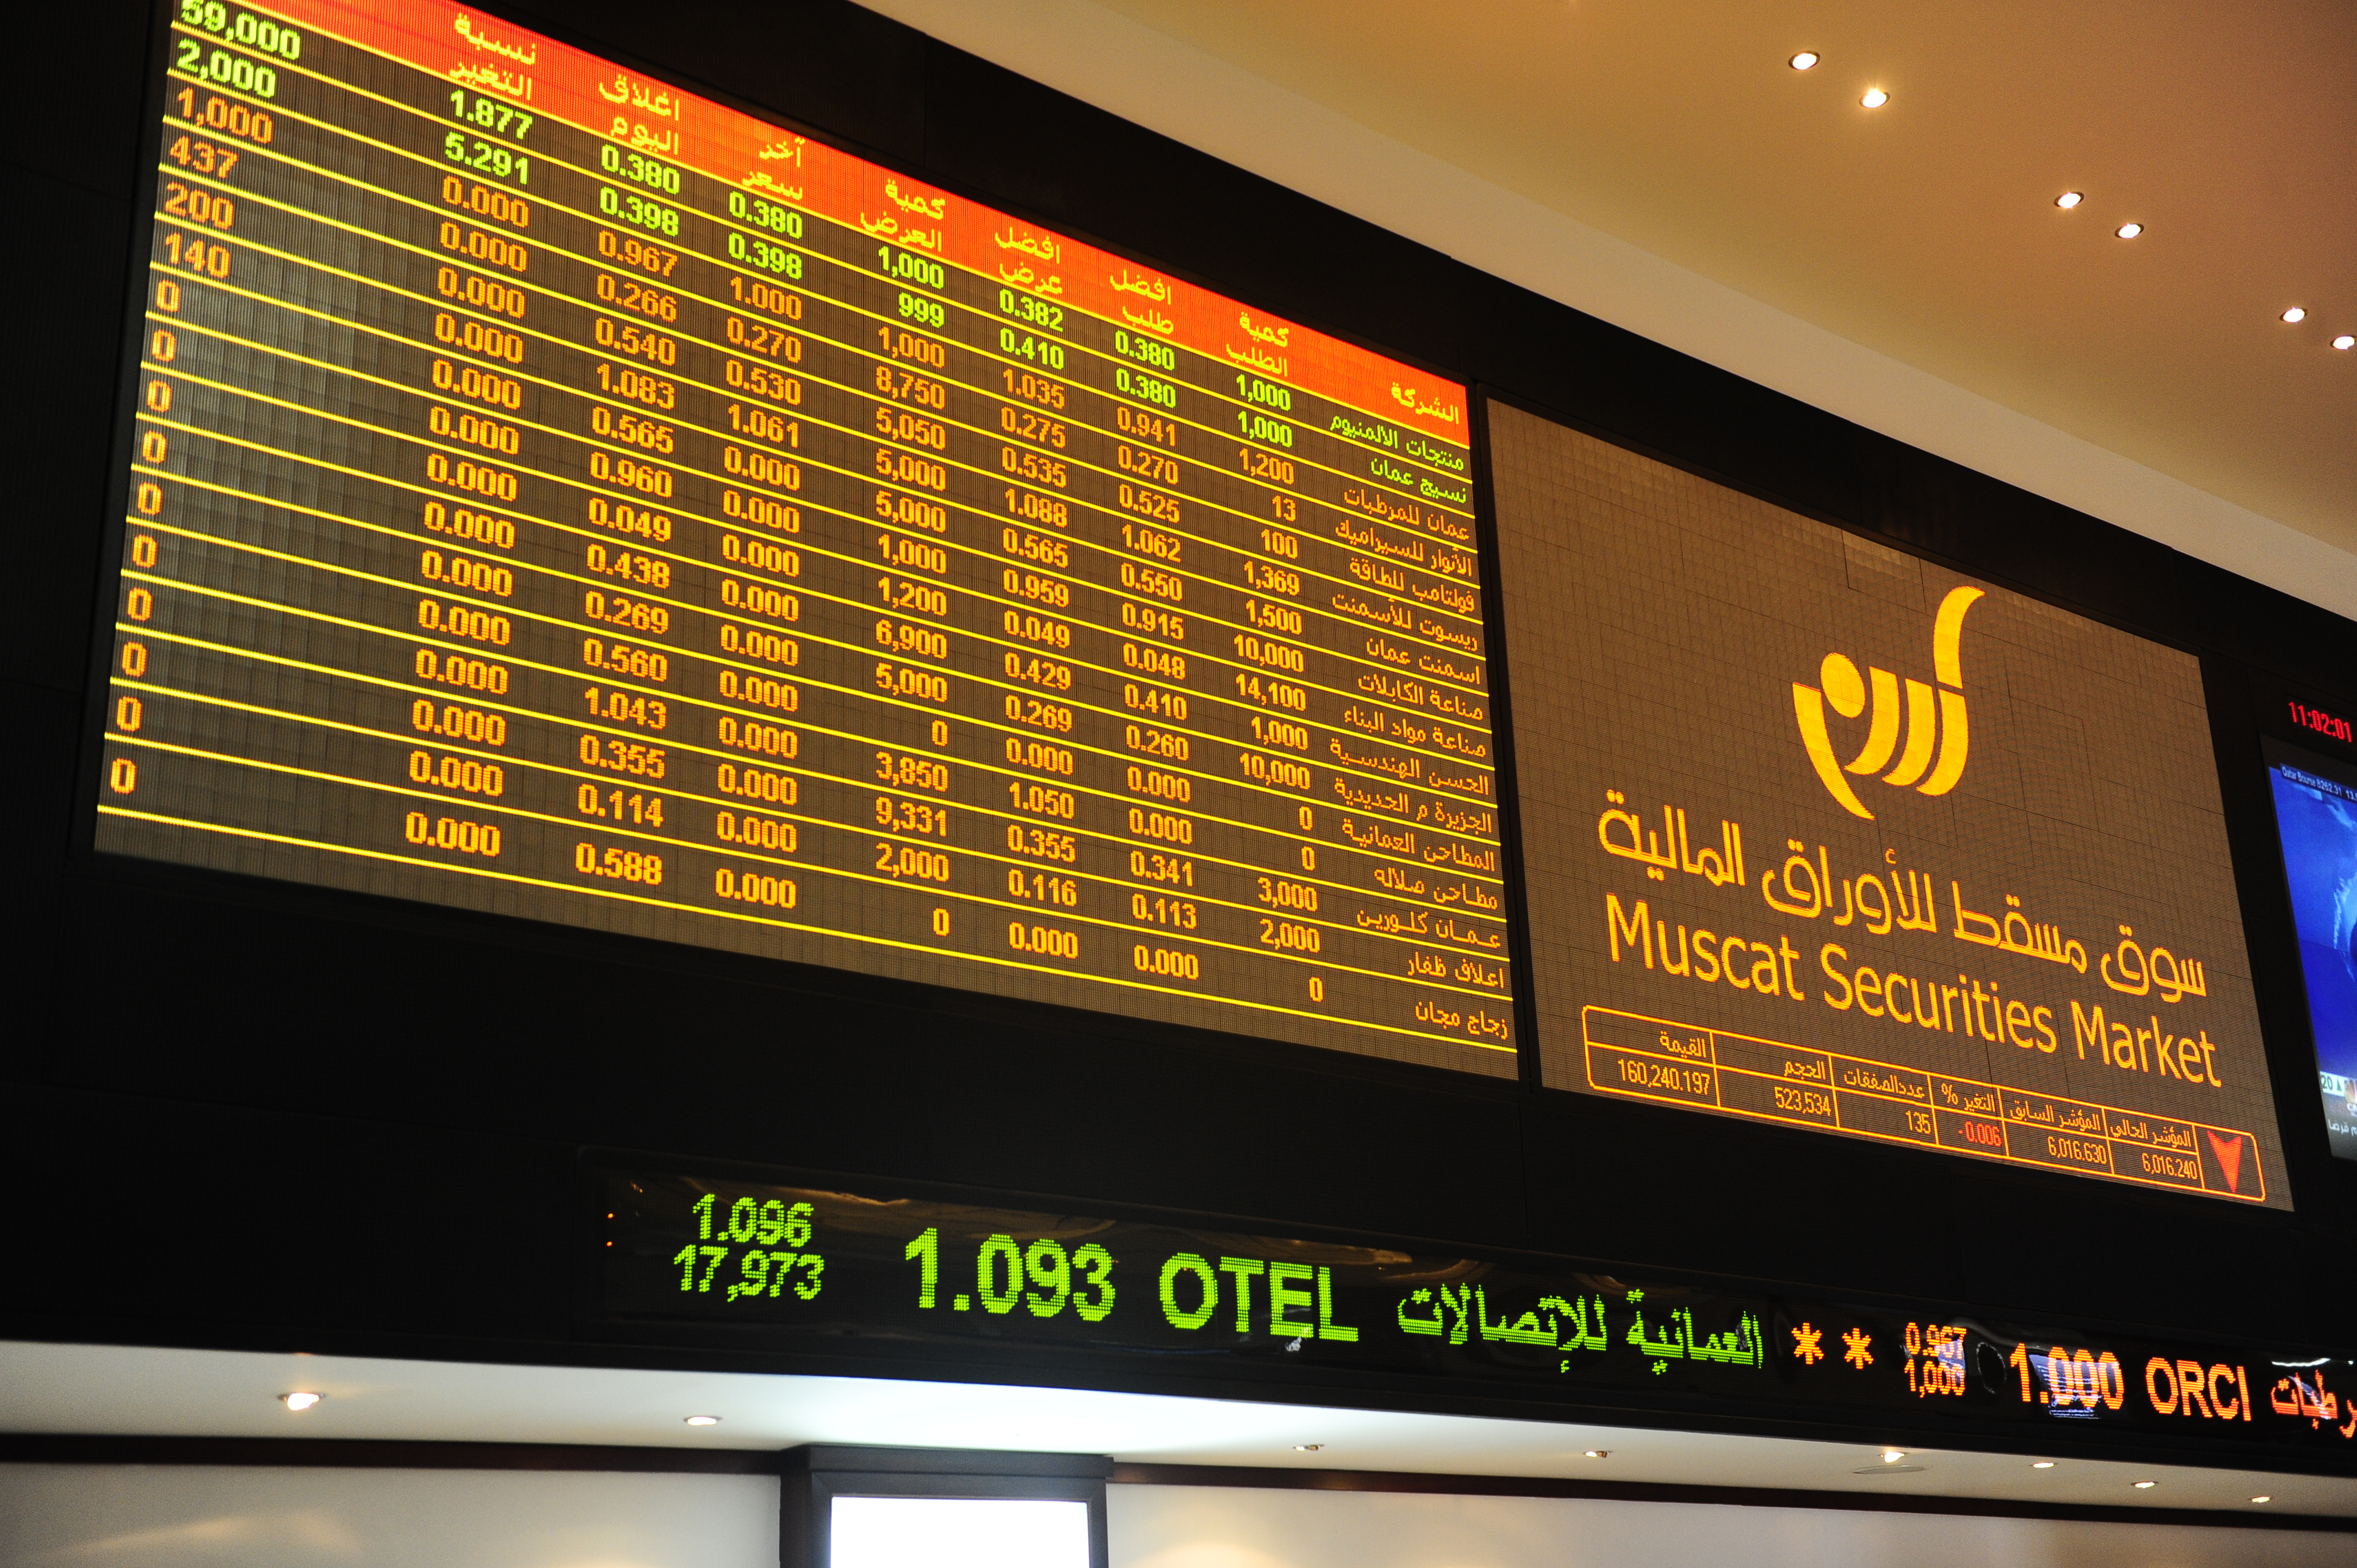 Retail support props up Oman's share index